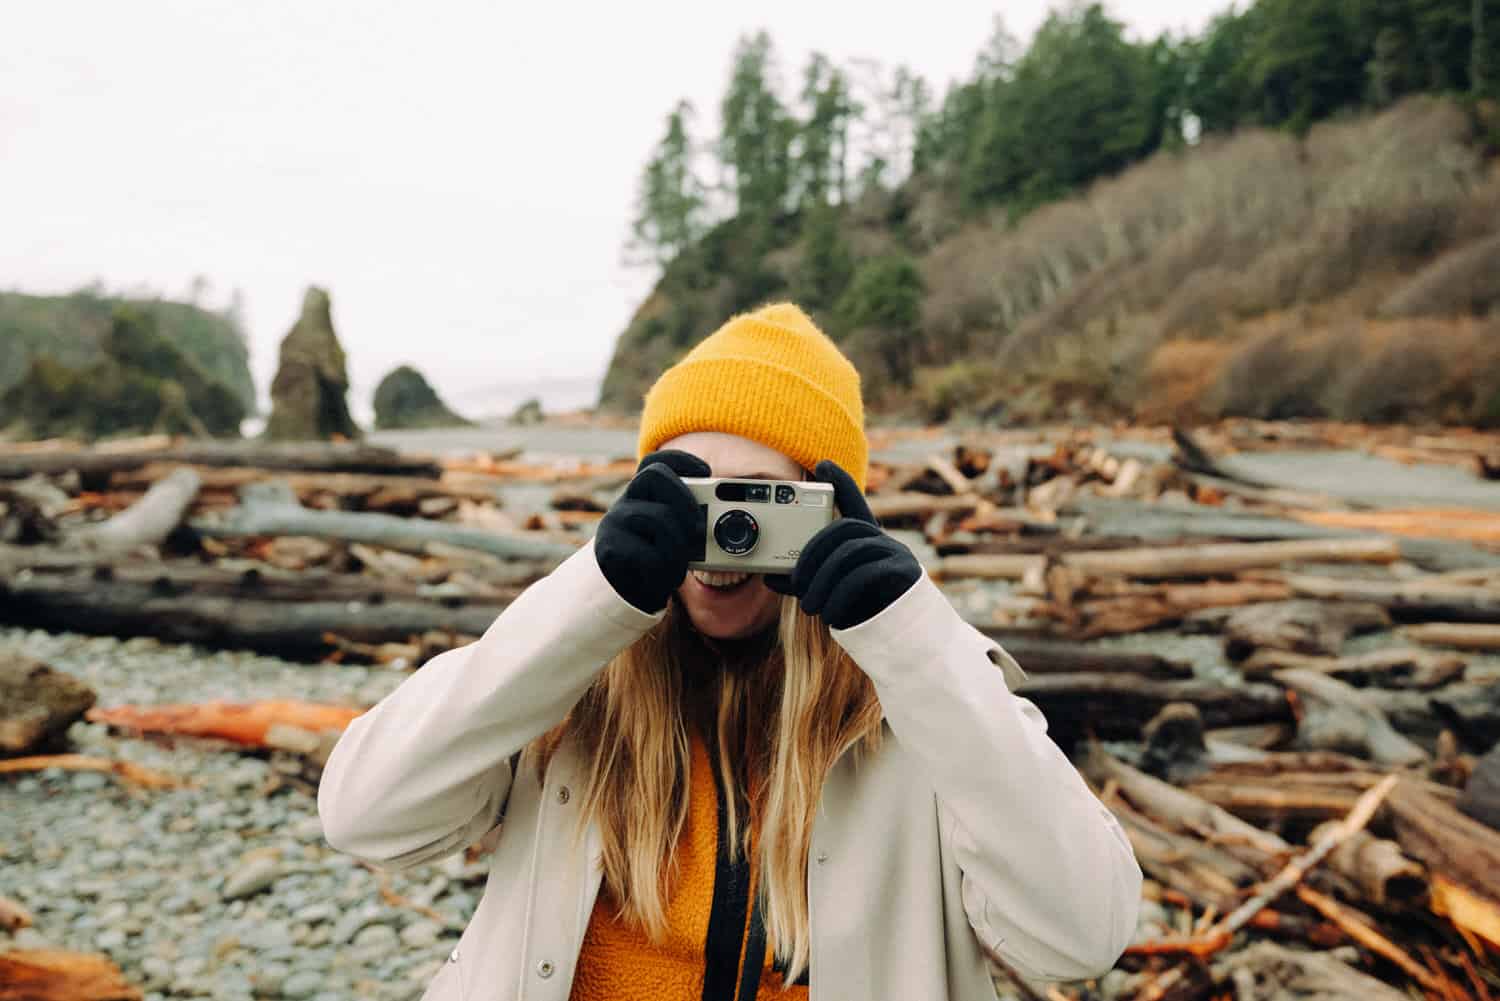 Photography Opportunities at Ruby Beach in Washington